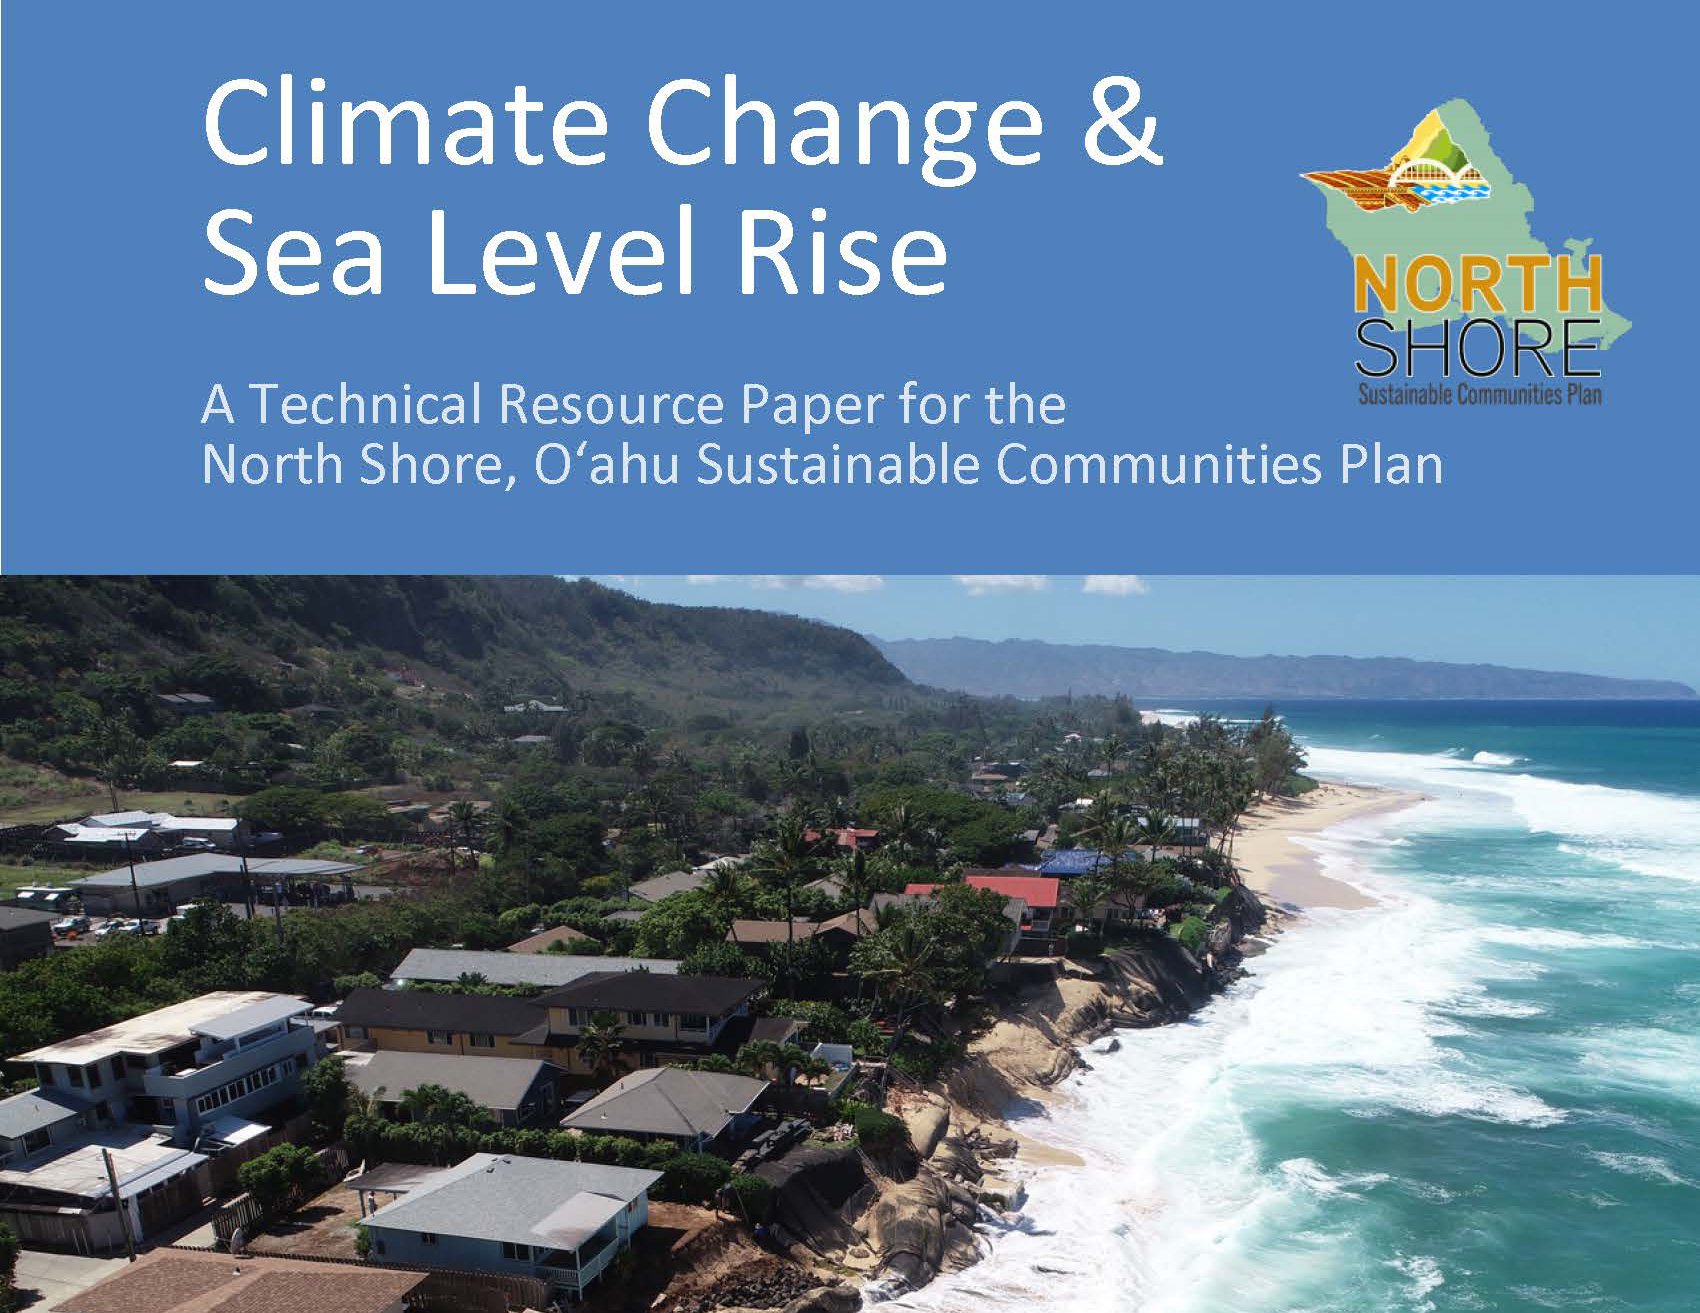 Cover image for 'Climate Change & Sea Level Rise' depicting coastal erosion on the North Shore of Oahu